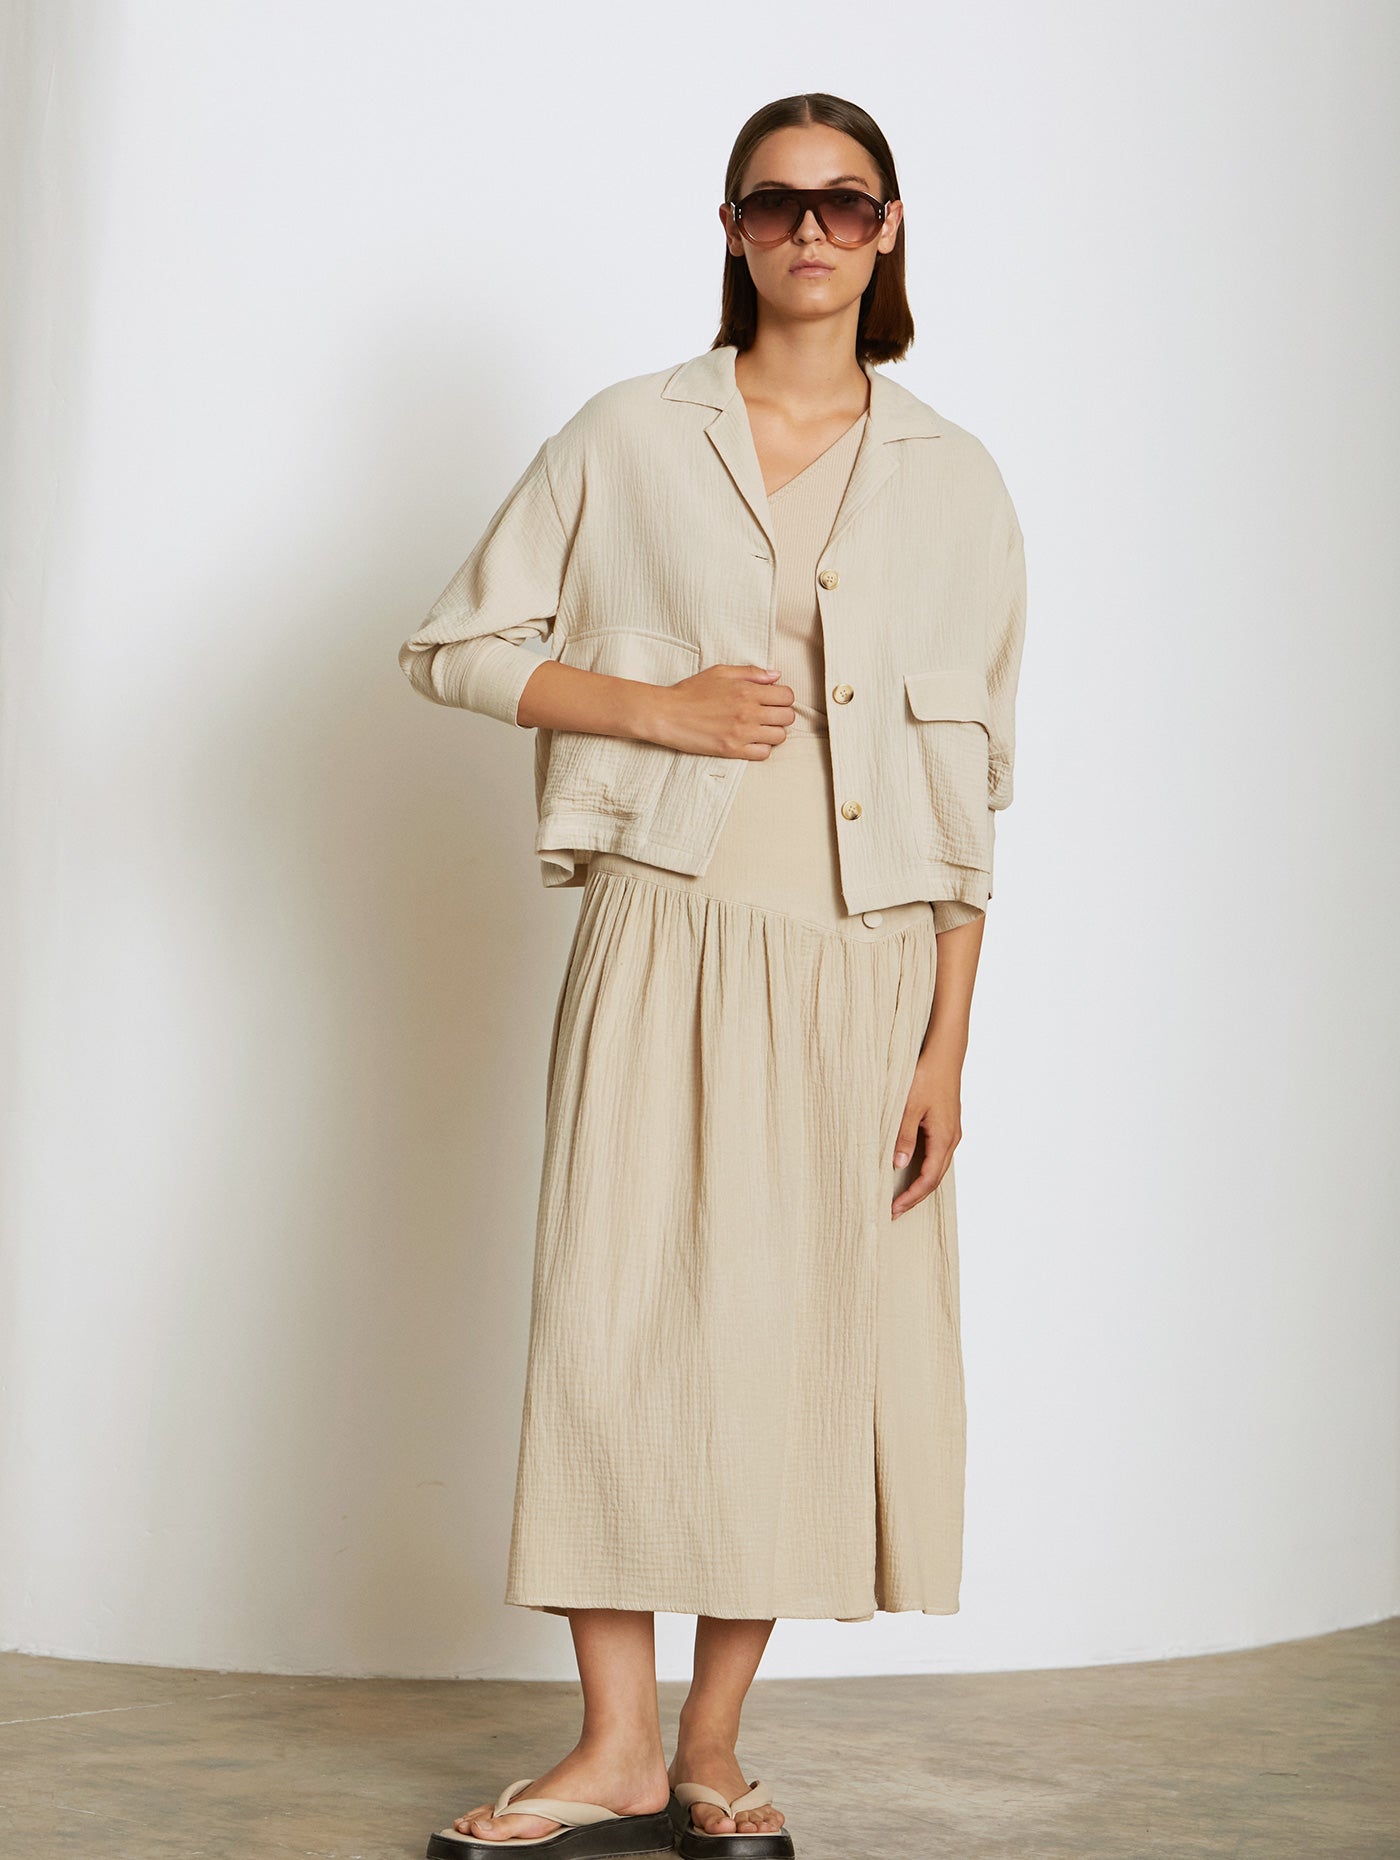 This Cotton bambula shirt from Skatie features a lapel collar and three quarter length sleeves that are pleated at the cuff. With three large buttons to fasten and oversized patch pockets at the front, this versatile piece can be worn as a blouse or open as a short cropped jacket. The neutral colour offers endless styling possibilities, and the true to size fit creates a flattering and comfortable boxy style.